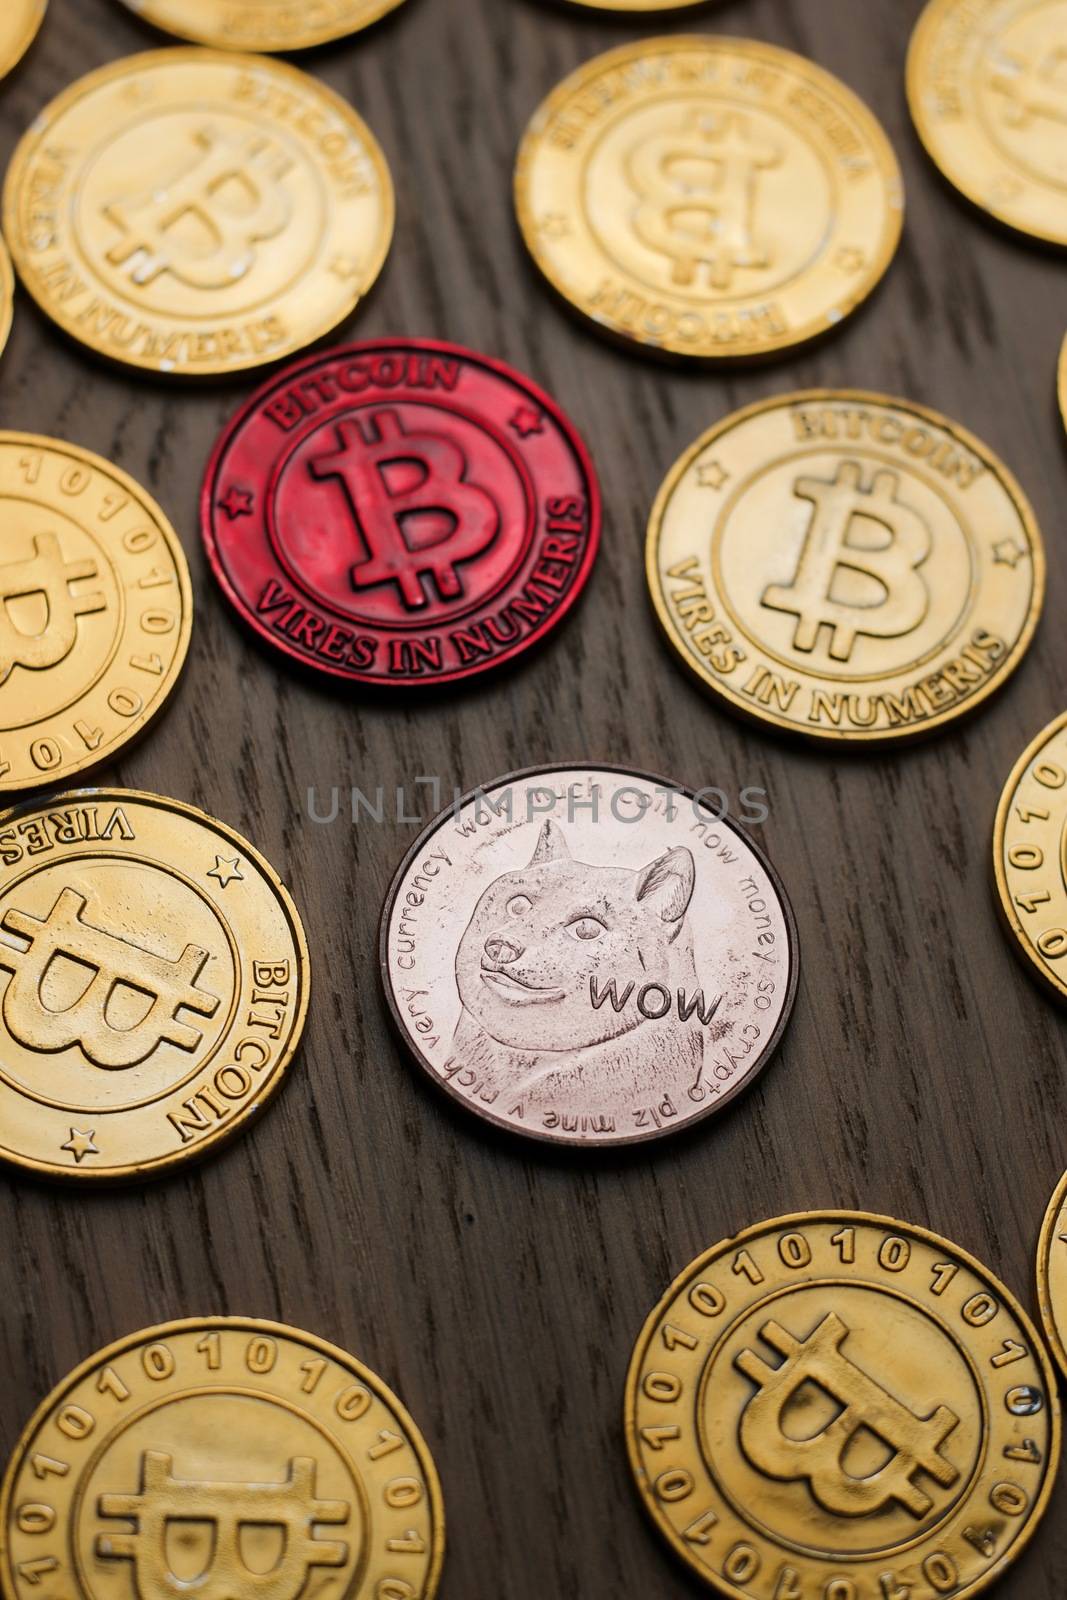 Bitcoin and Dogecoin coins by adriantoday